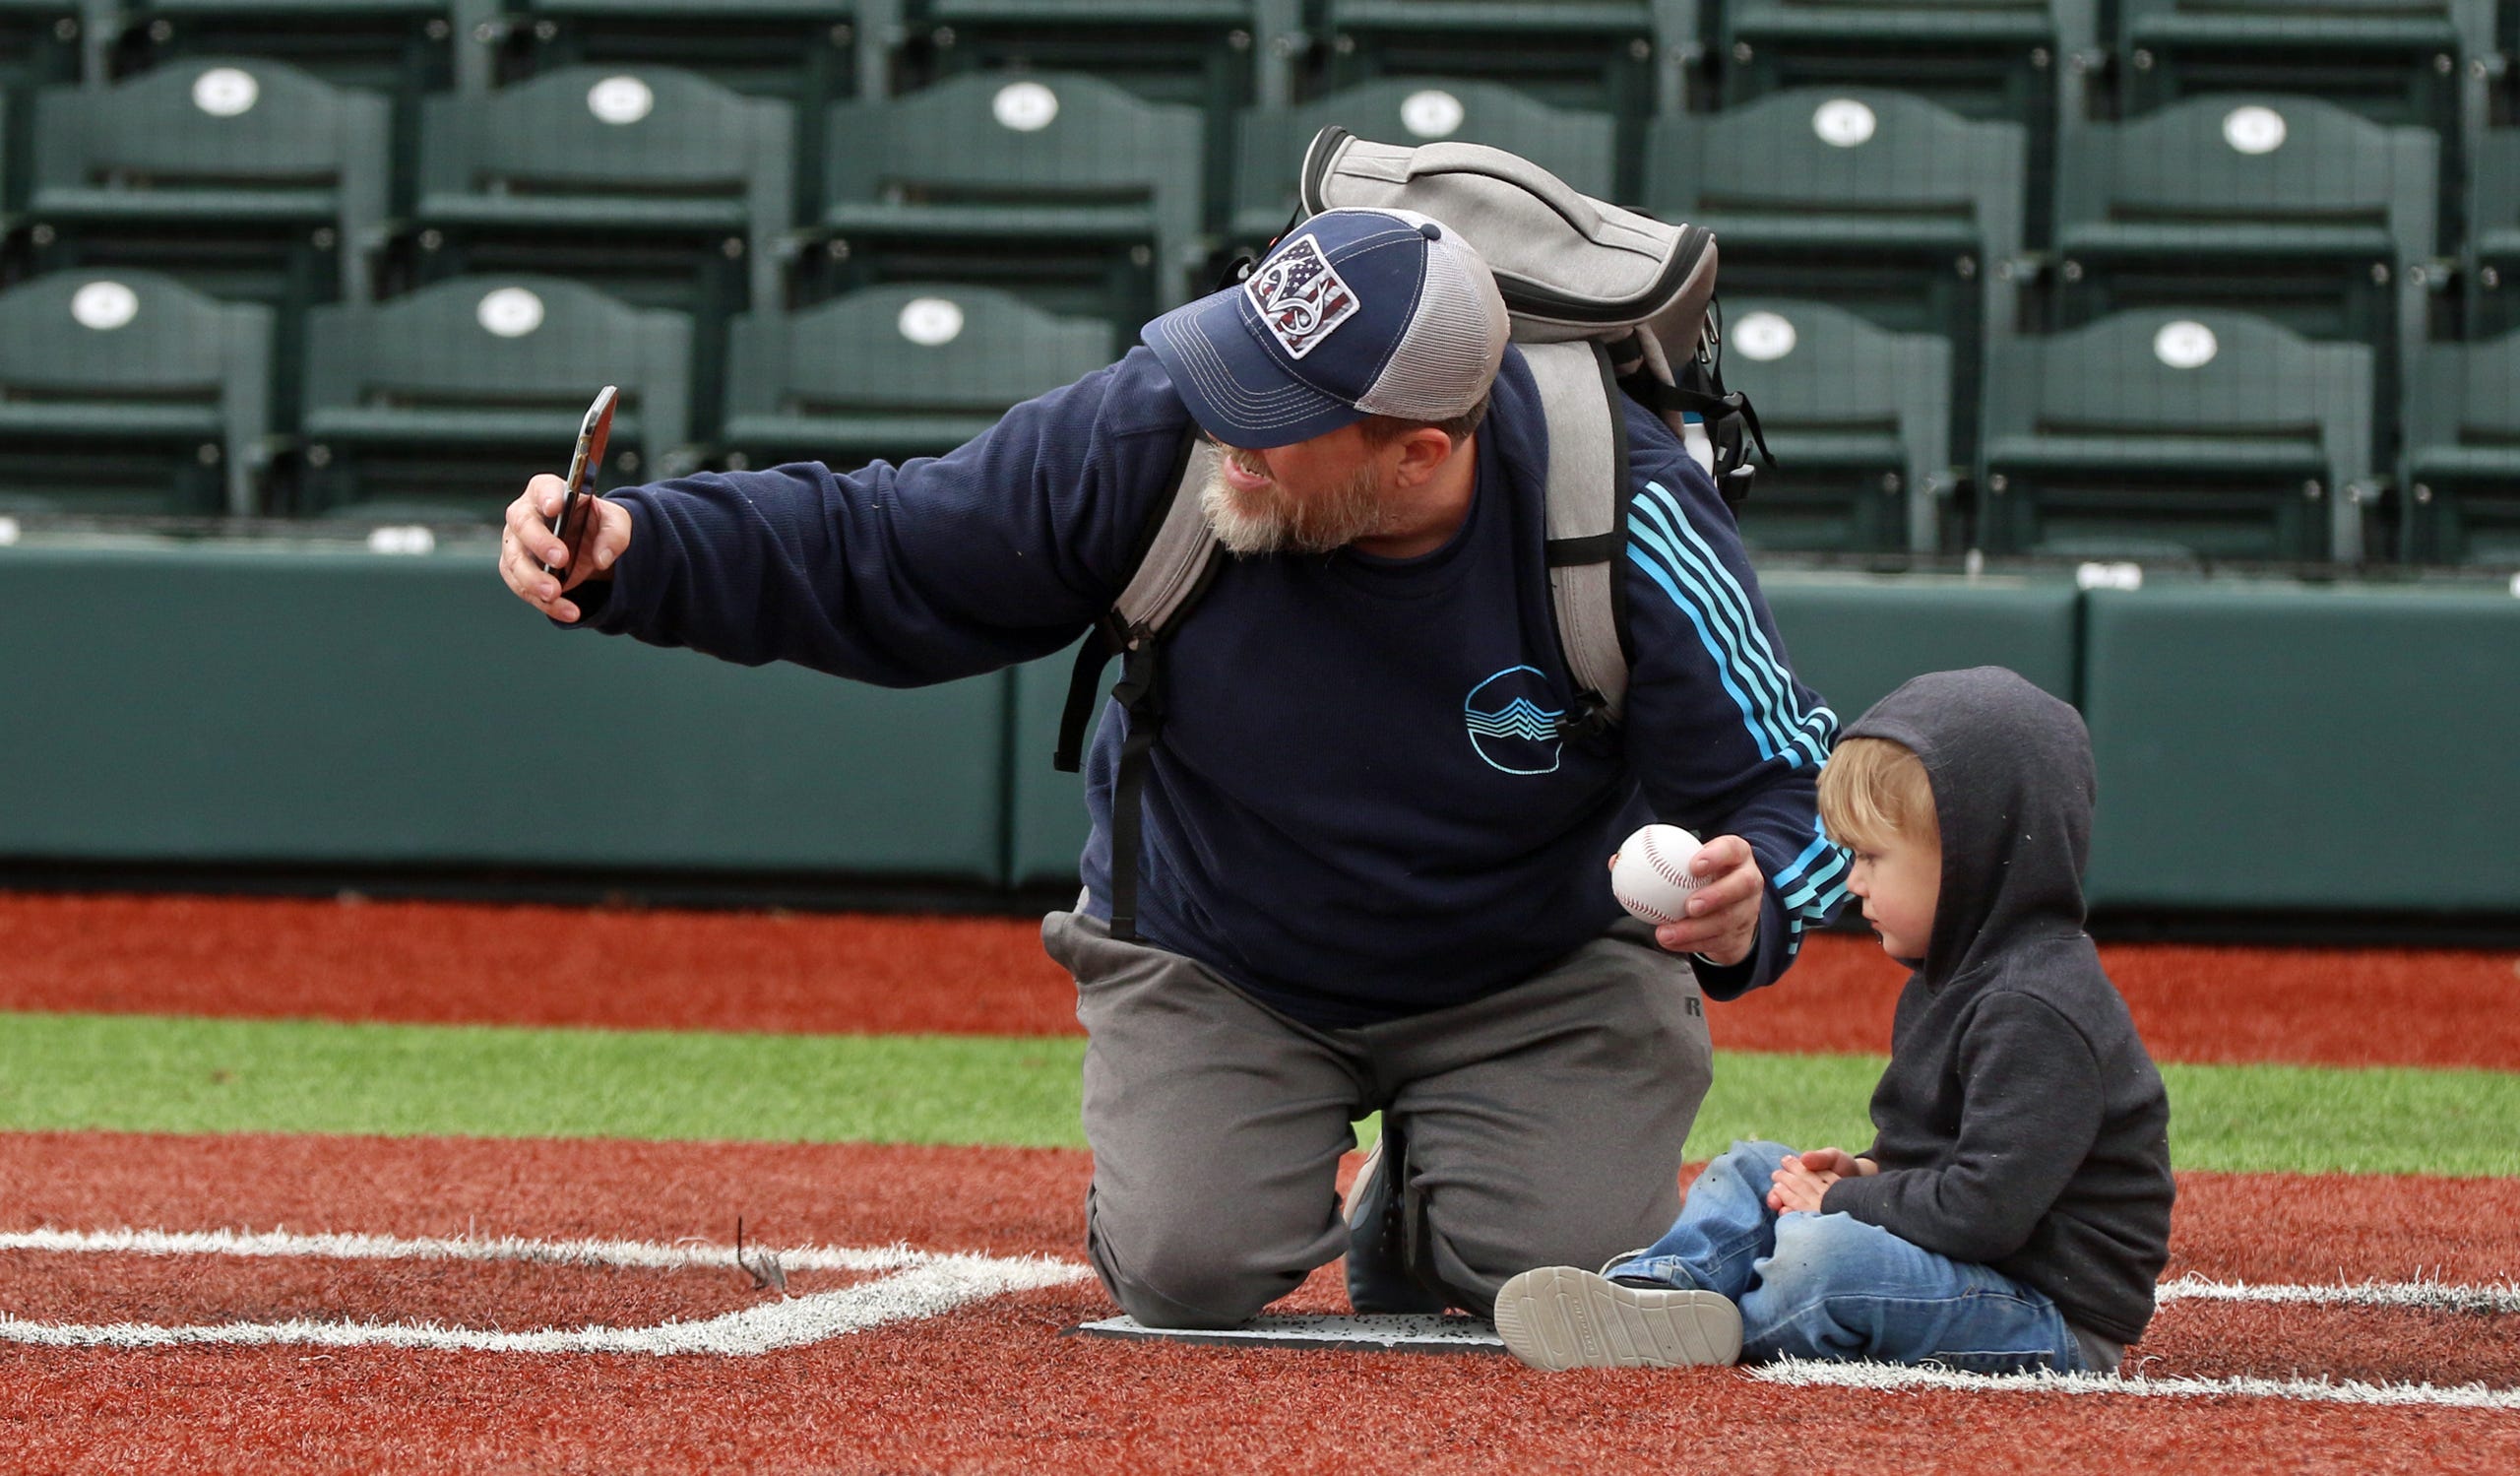 Robert Lugo takes a photo of himself and his son, two-year-old Ashton Lugo, at home plate during the Honey Hunters Community Day held Saturday, April 9, 2022 at CaroMont Health Park.